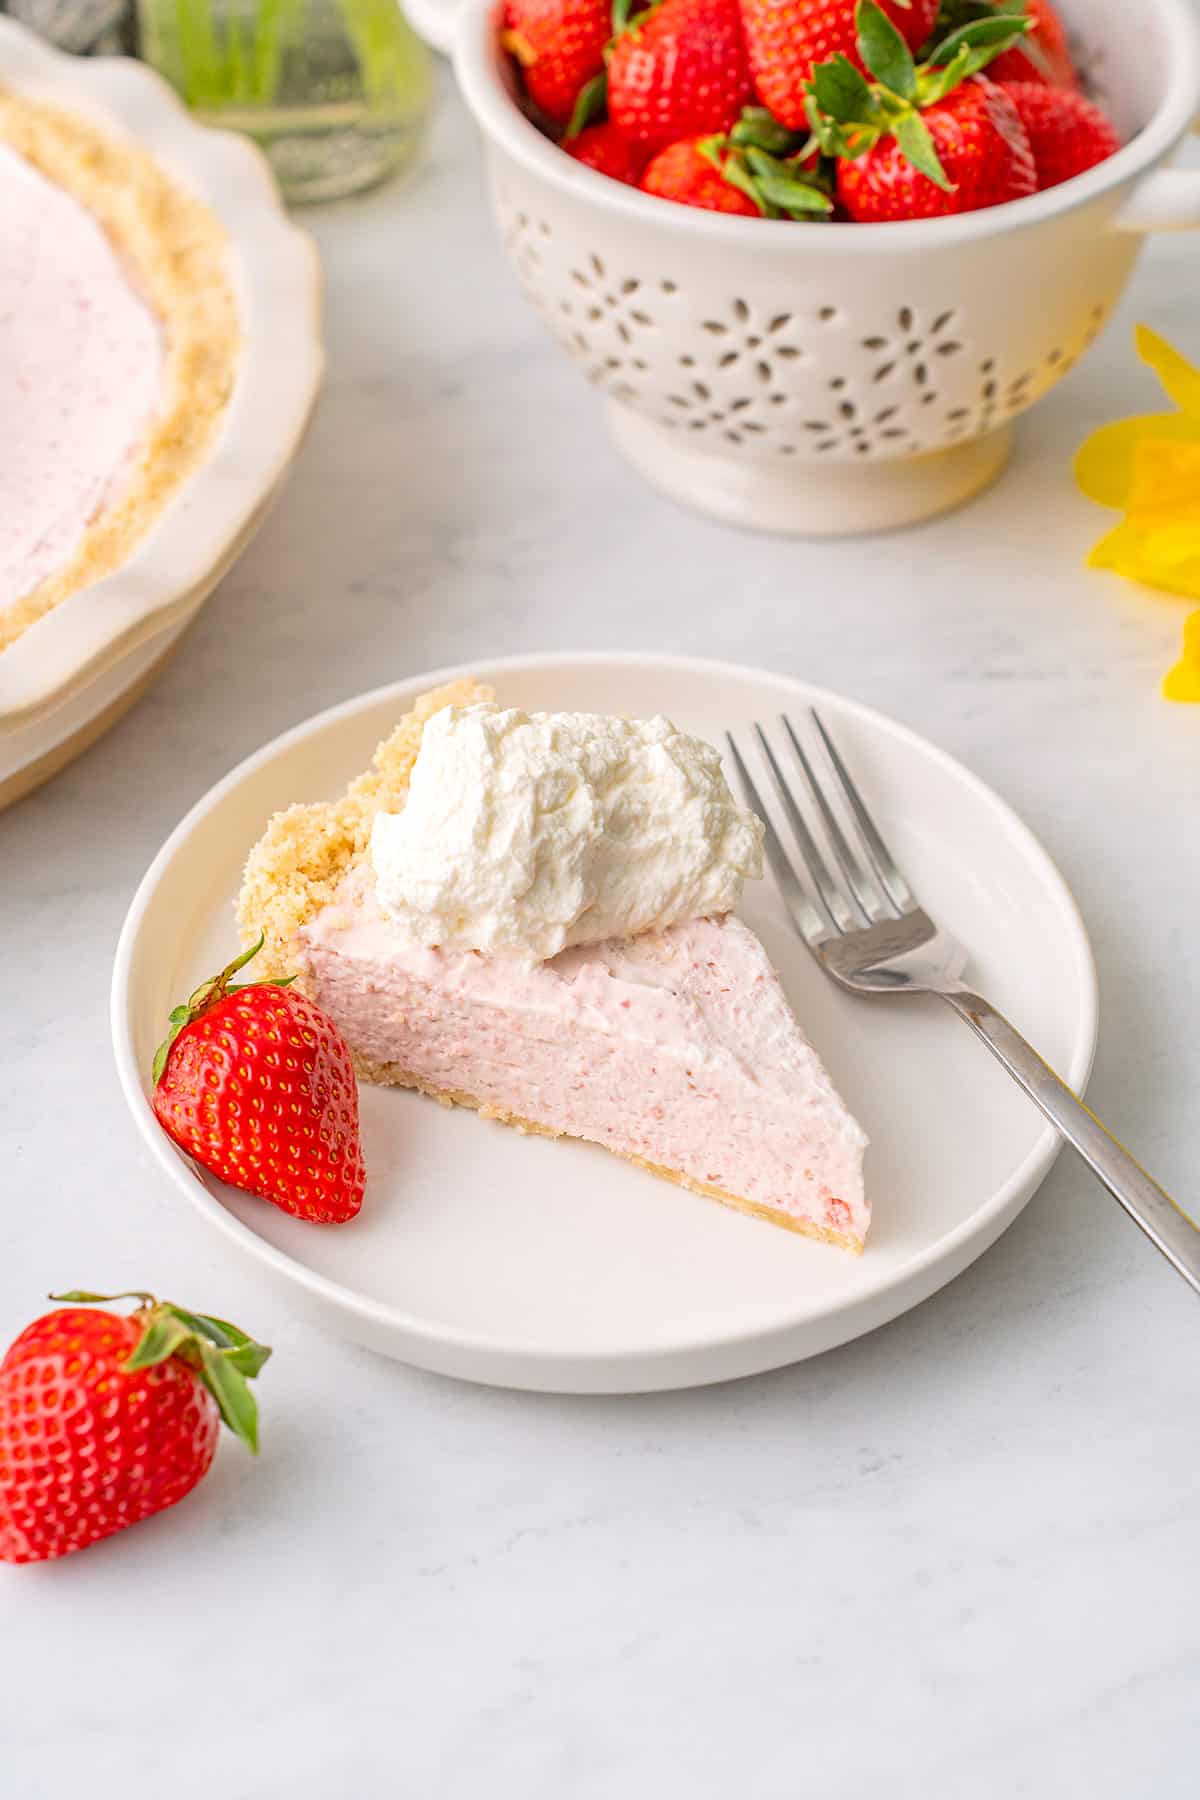 A slice of Keto Strawberry Pie on a white plate with strawberries and whipped cream.